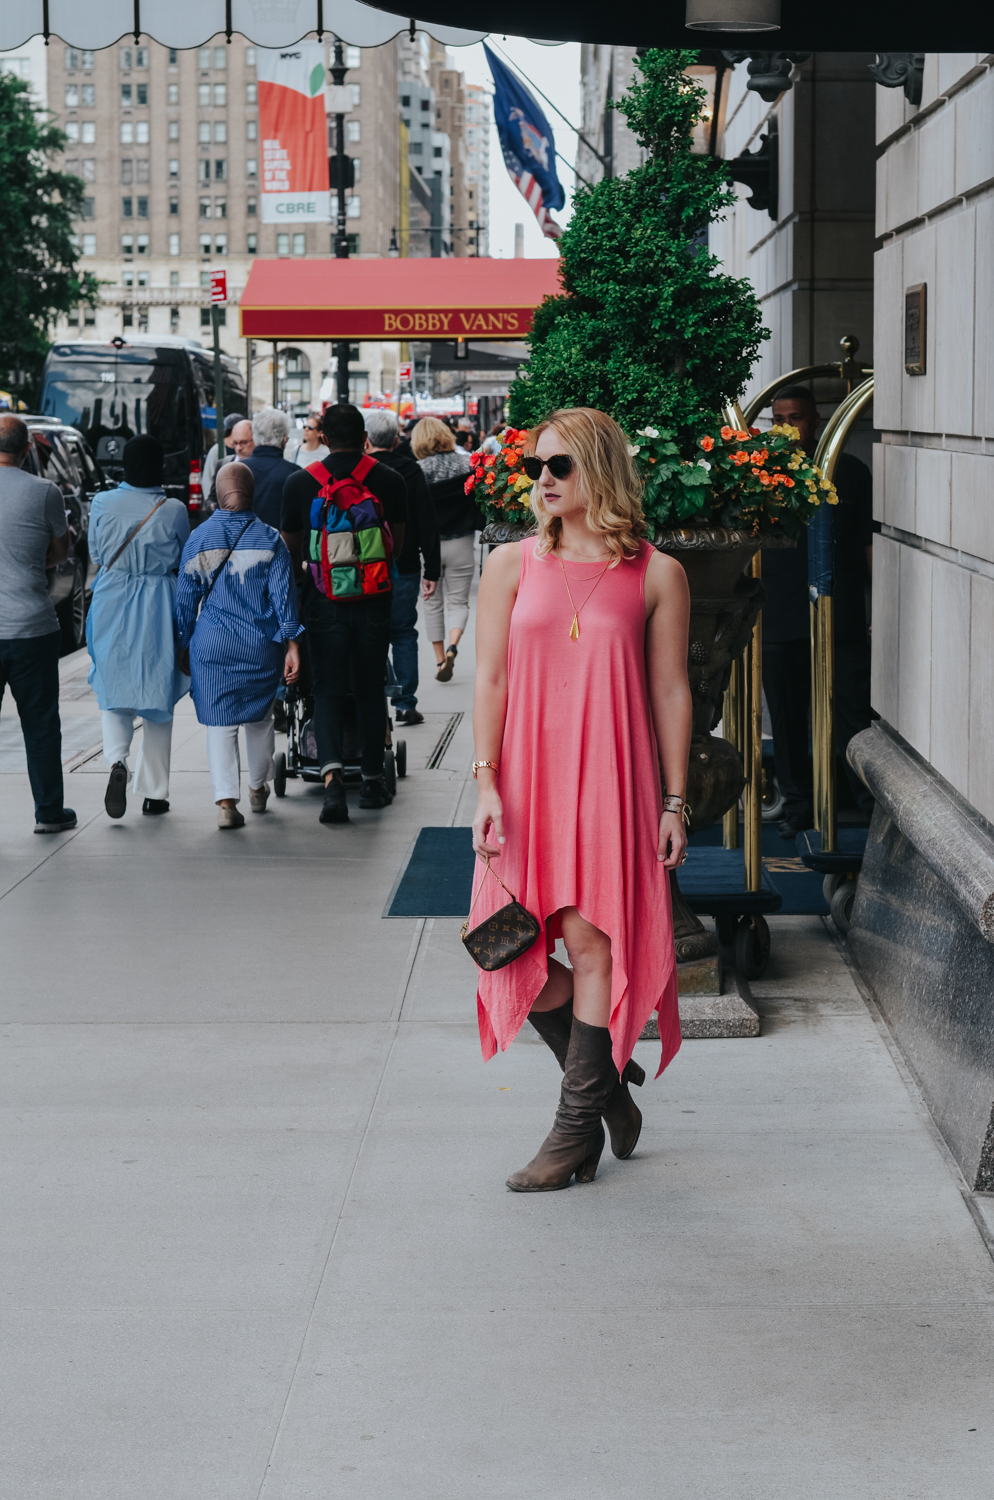 New York Fashion Week Look: Coral Maxi Dress and Distressed Boots - the perfect summer to fall transition look.